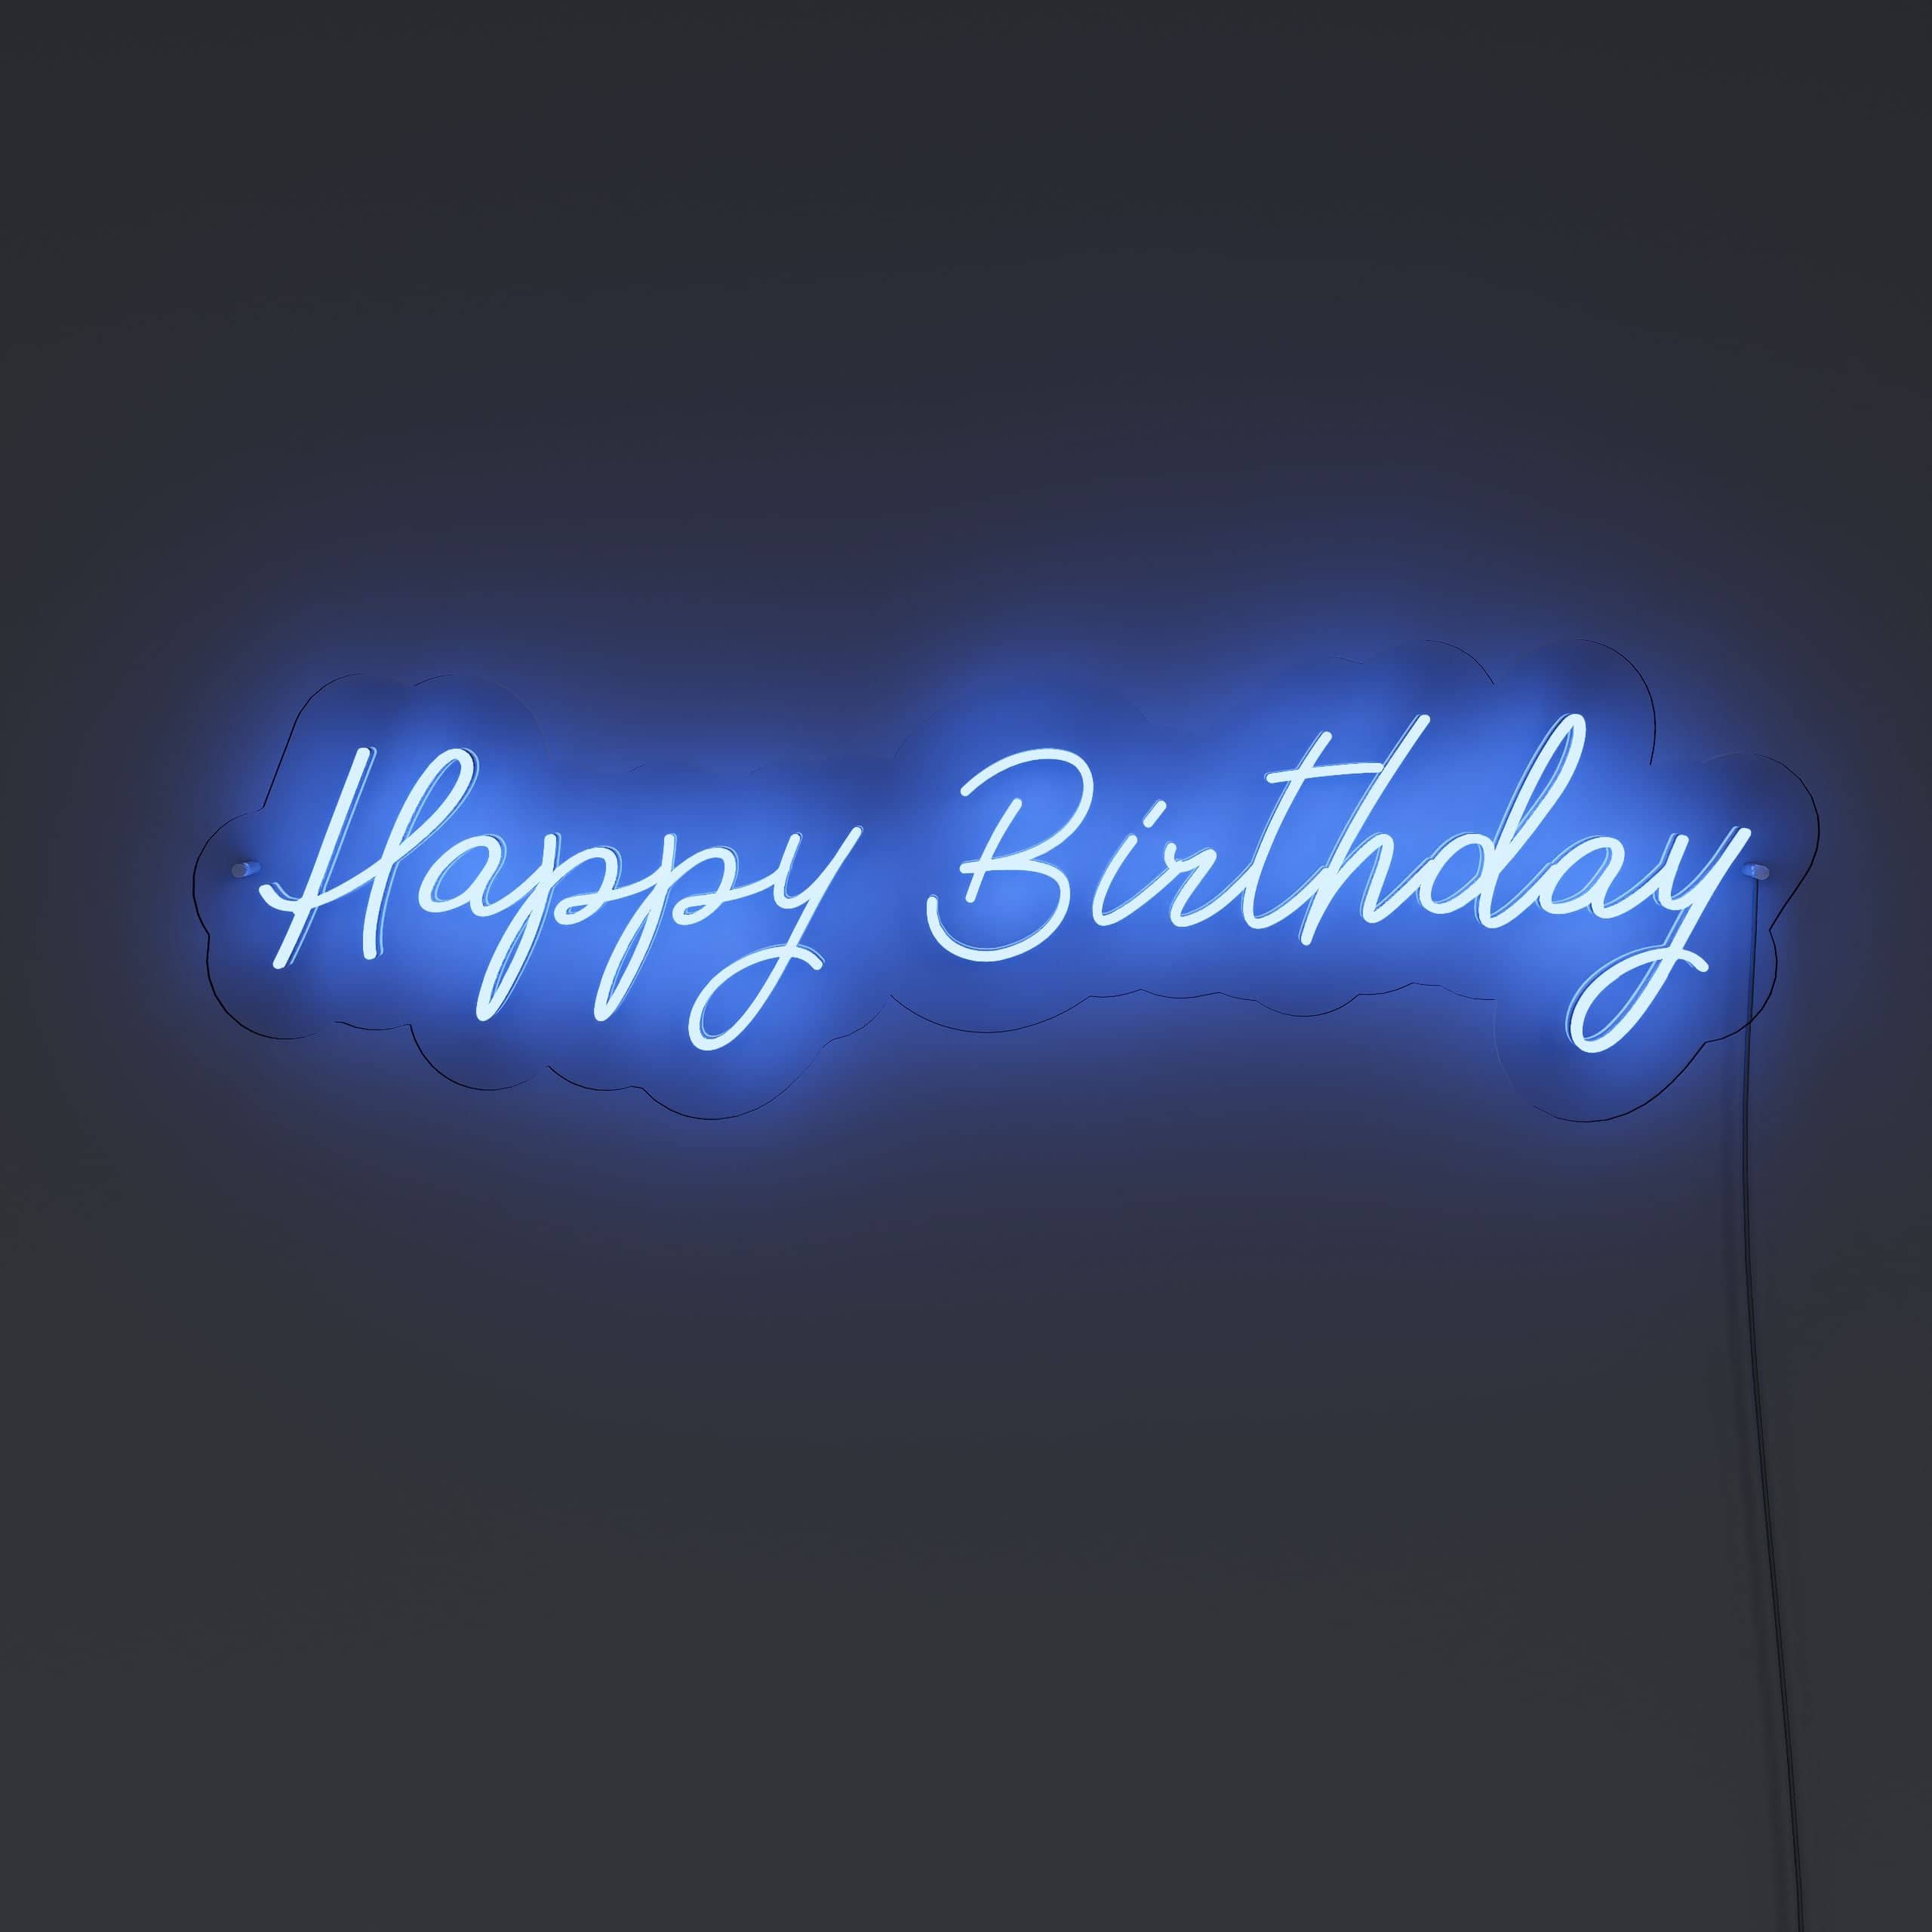 illuminate-your-special-day!-neon-sign-lite